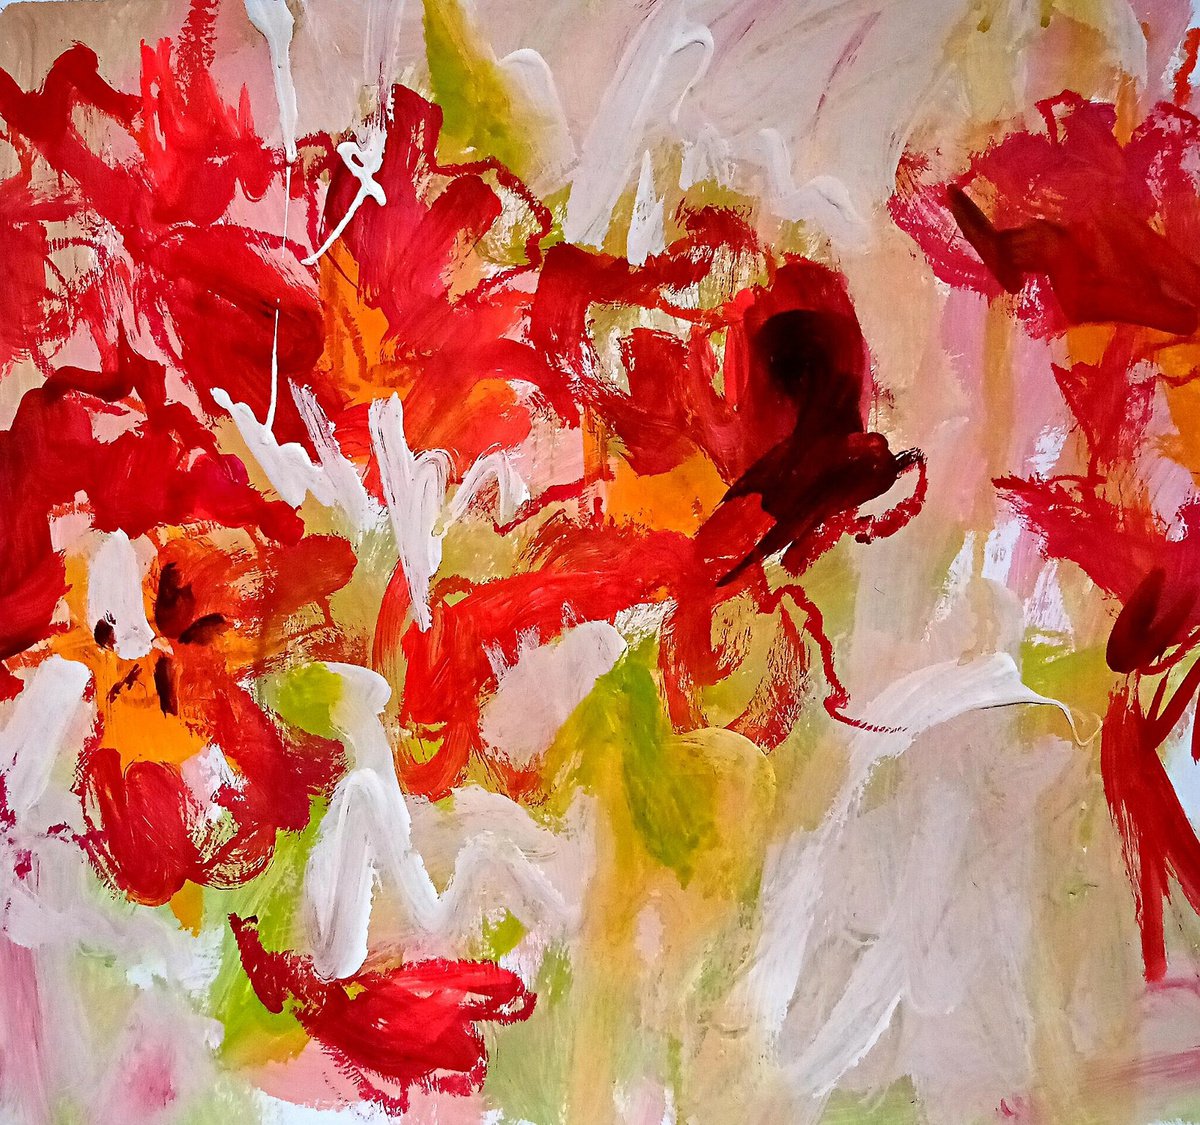 Abstract Red tulips#2/2022 by Valerie Lazareva